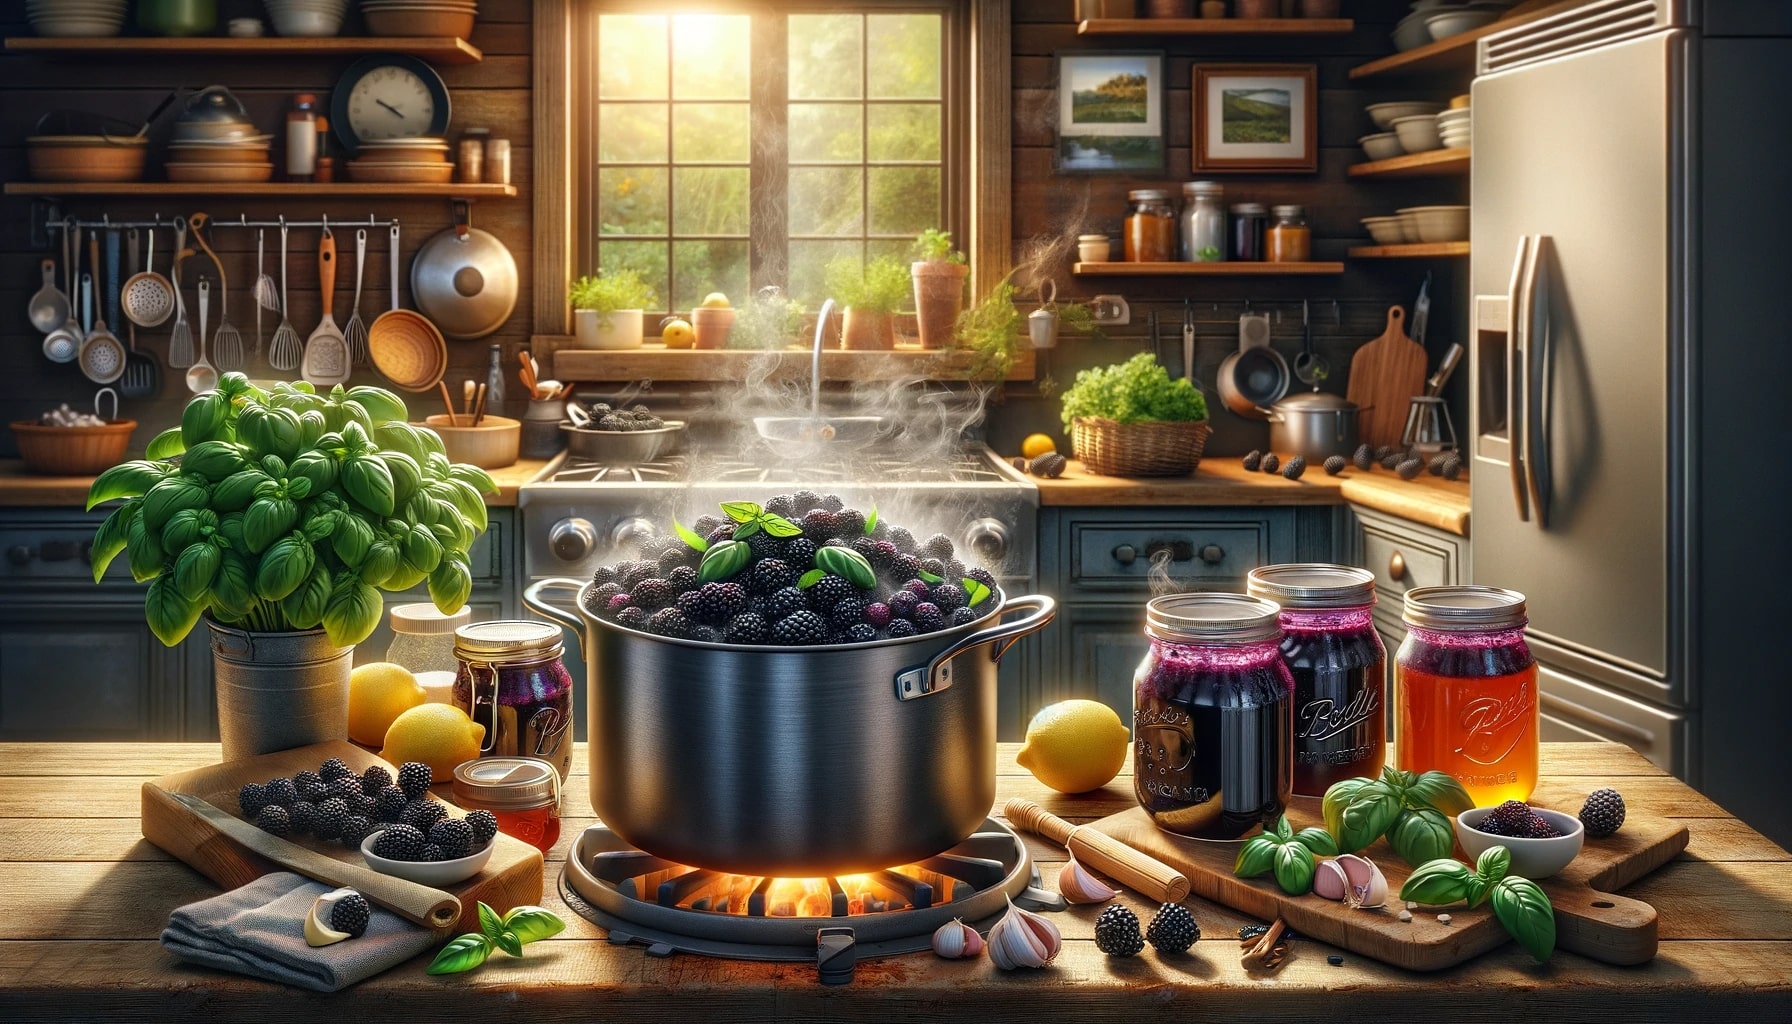 An illustration of making Blackberry Vanilla Basil Jam. It illustrates the cozy and inviting kitchen setting where the jam-making process is taking place.